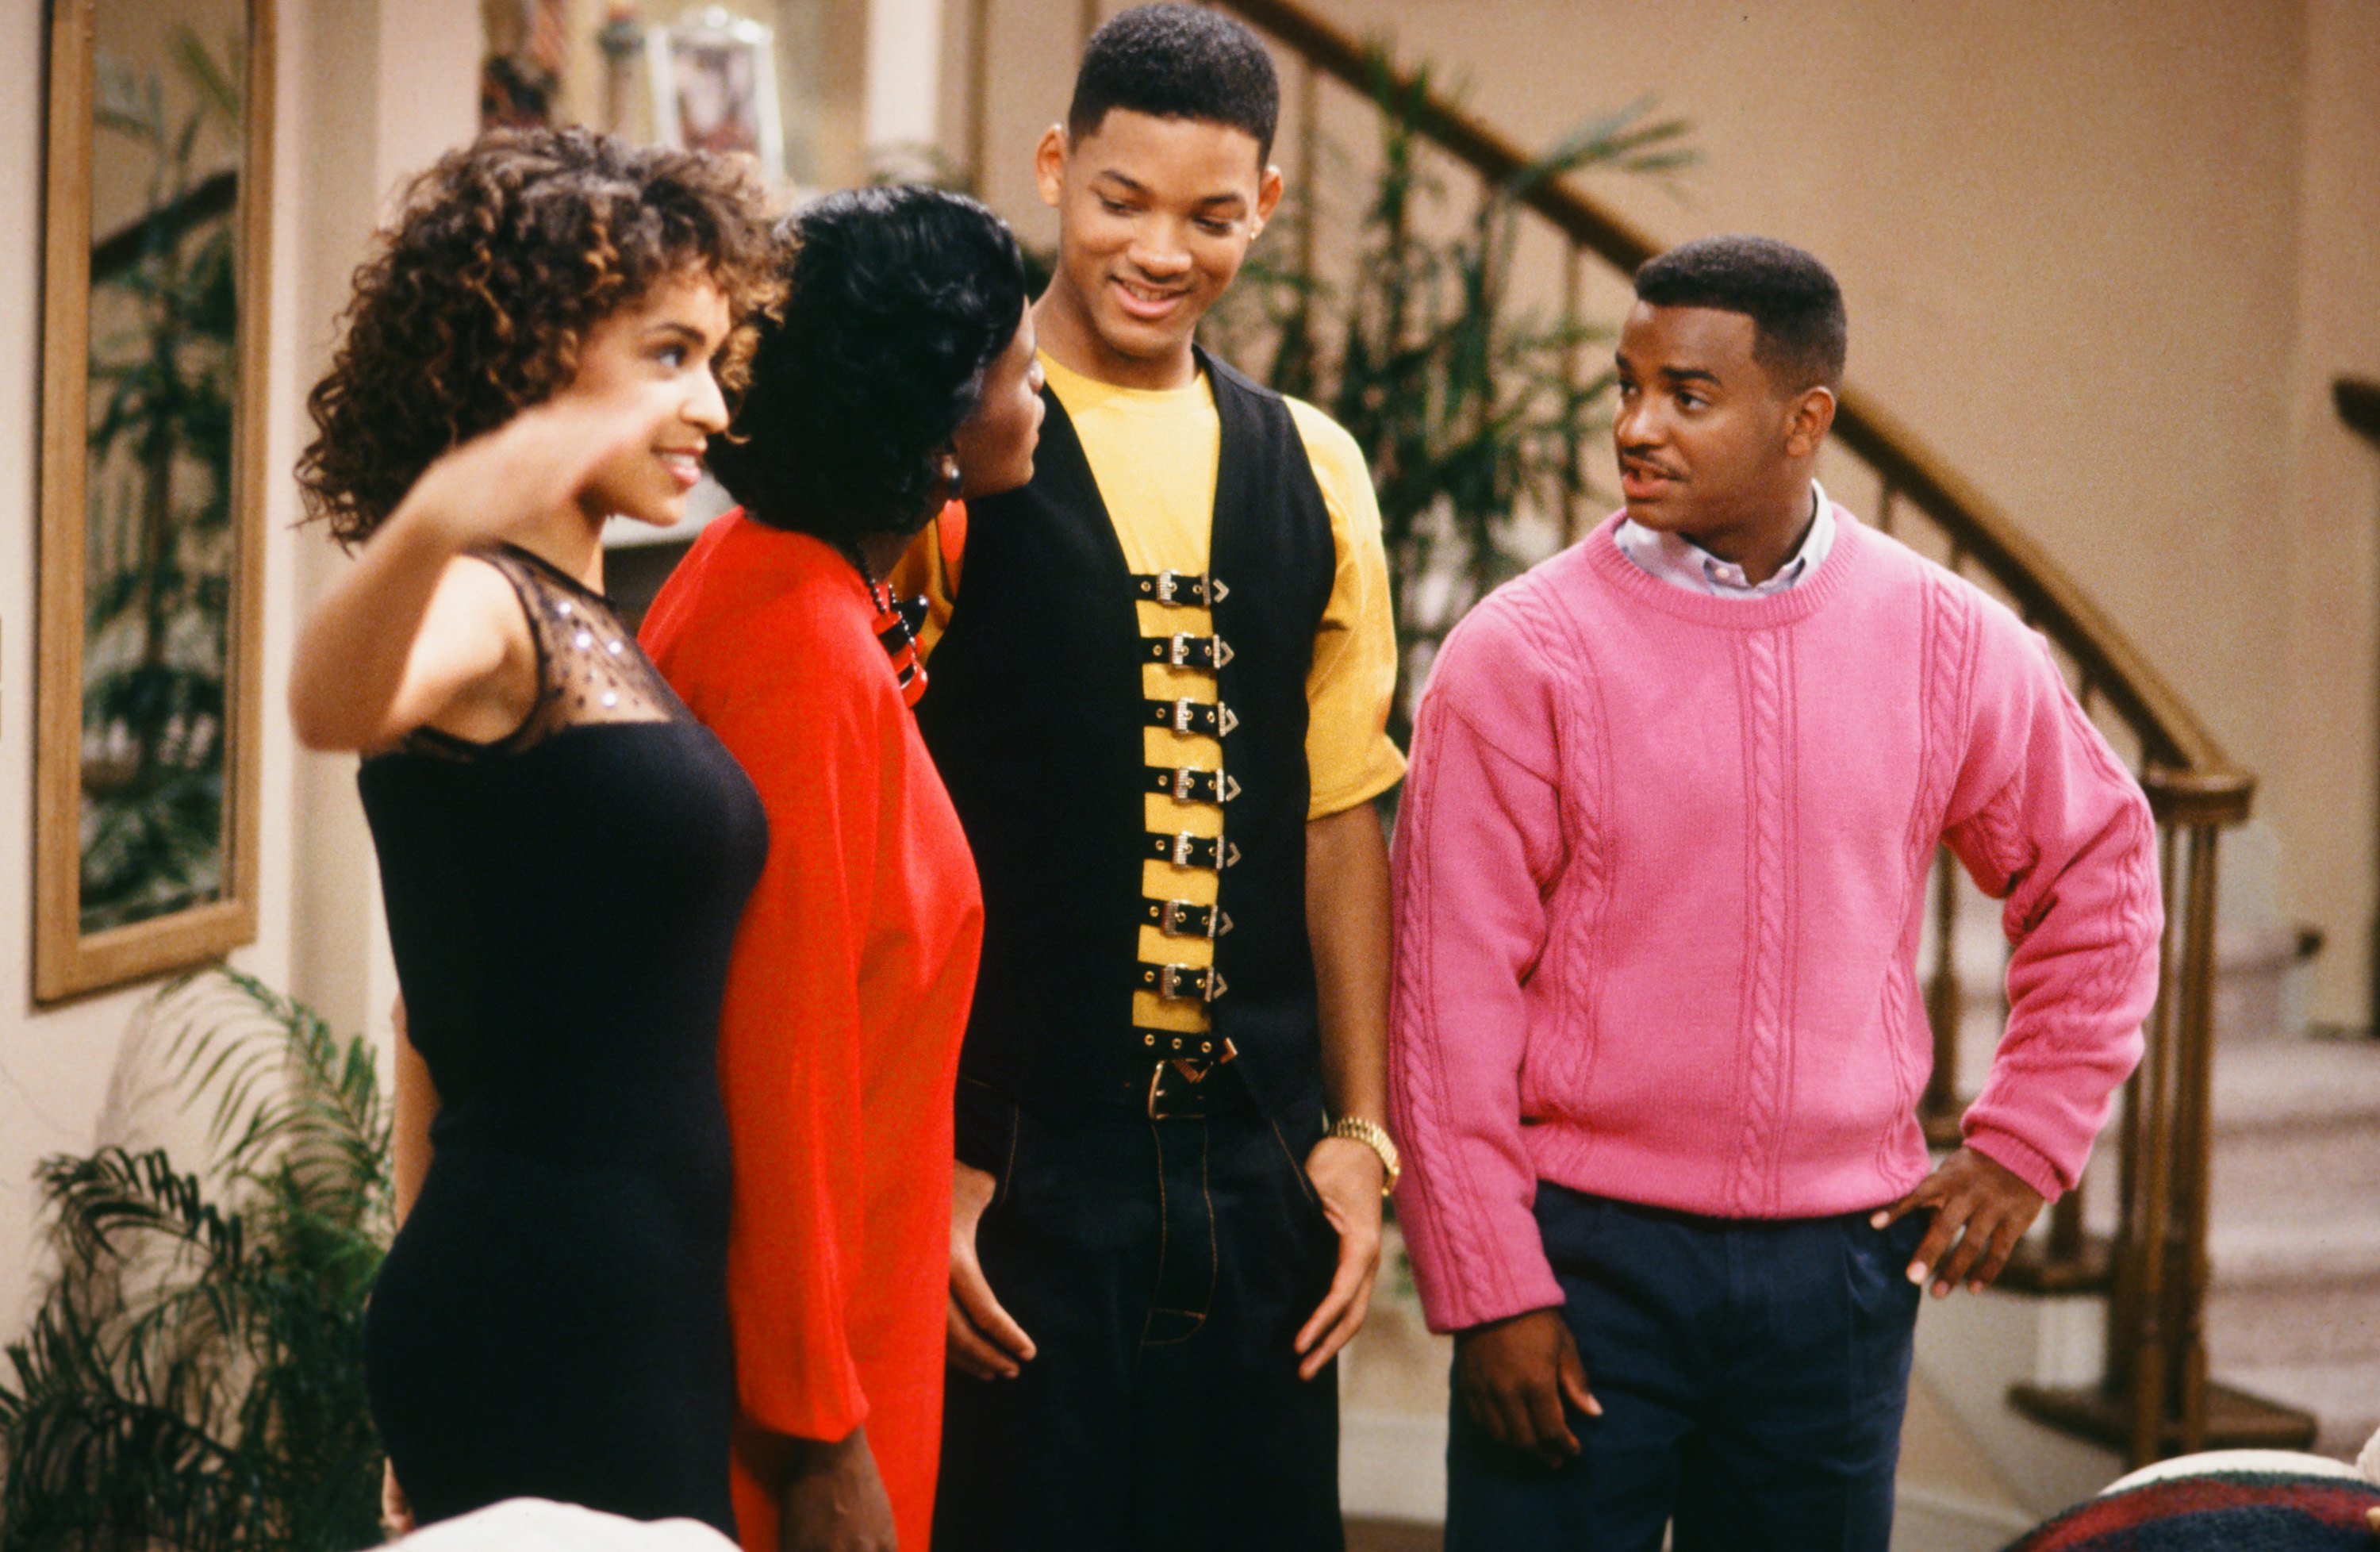 Karyn Parsons as Hilary Banks, Janet Hubert as Vivian Banks, Will Smith as William 'Will' Smith, and Alfonso Ribeiro as Carlton Banks